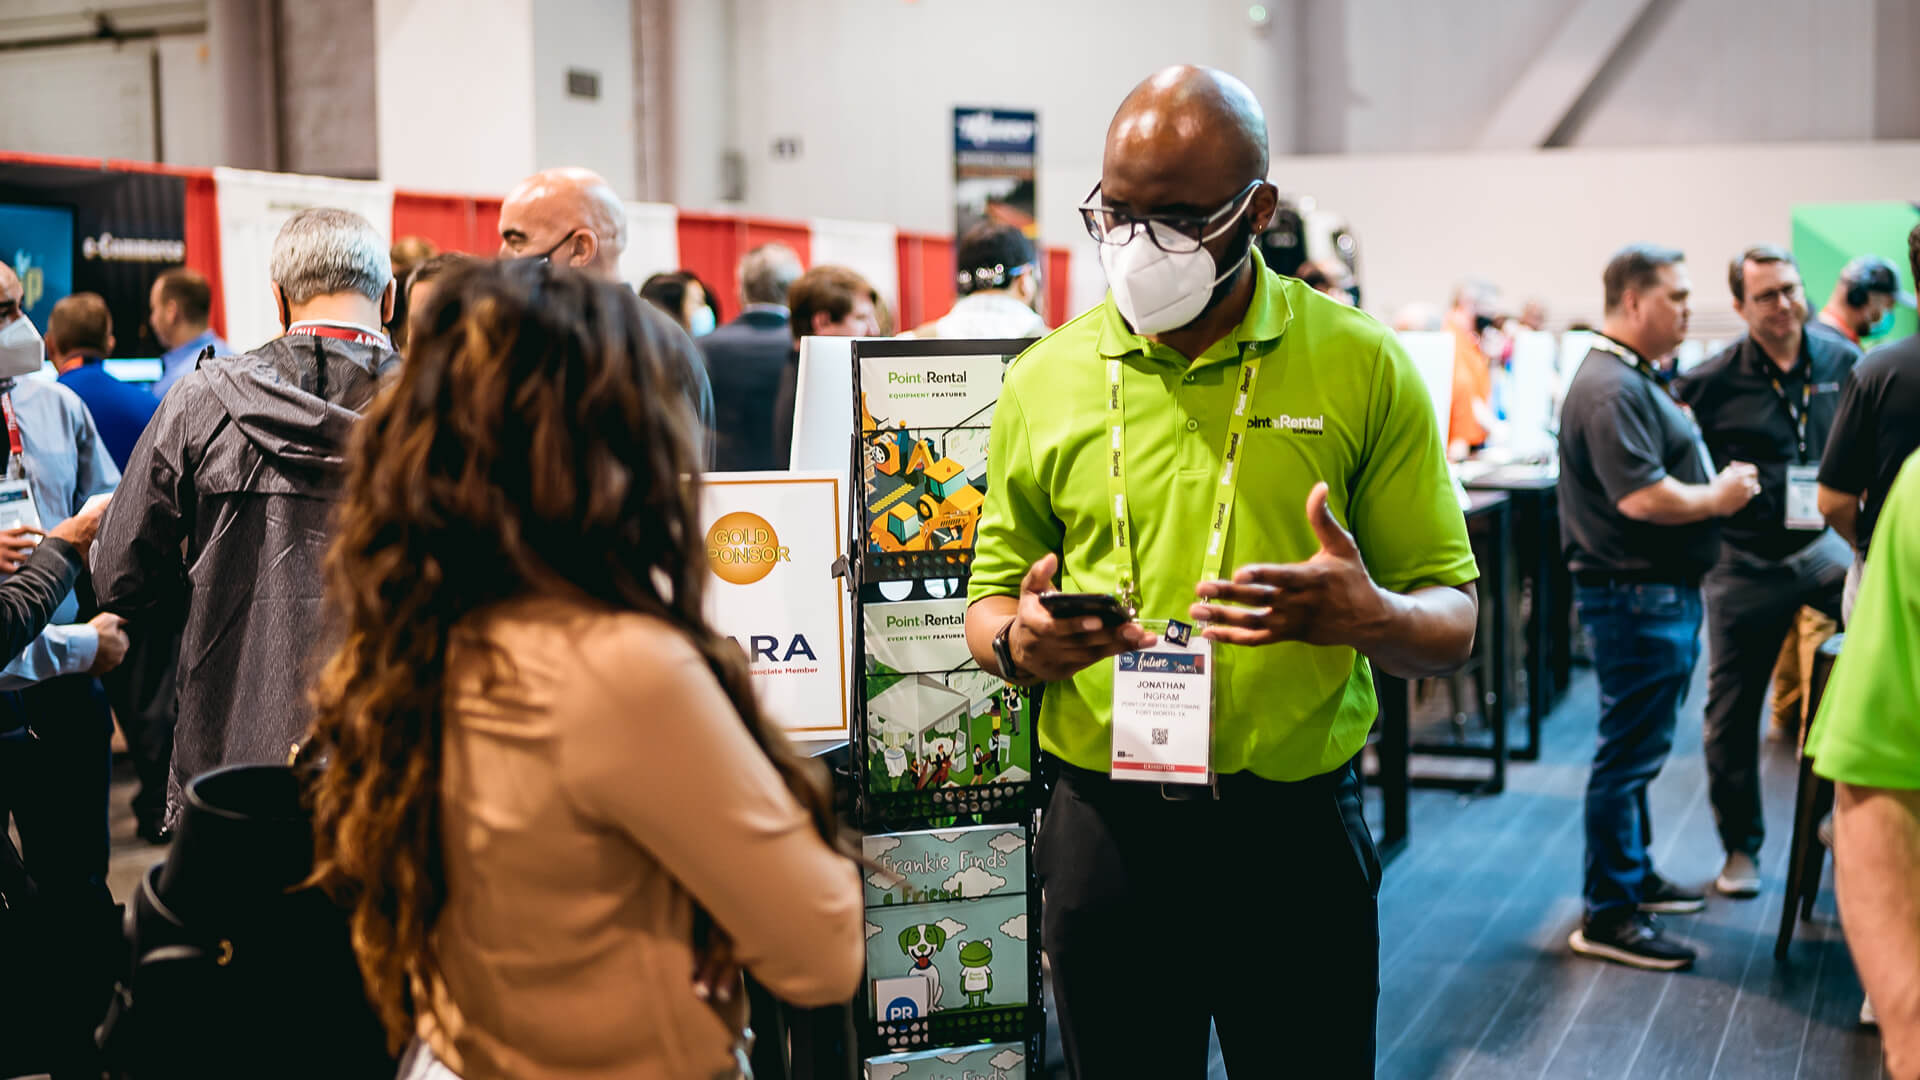 2021 Trade Show season looked a little different, as Jonathan, our masked SDR, talks to a visitor to the POR booth